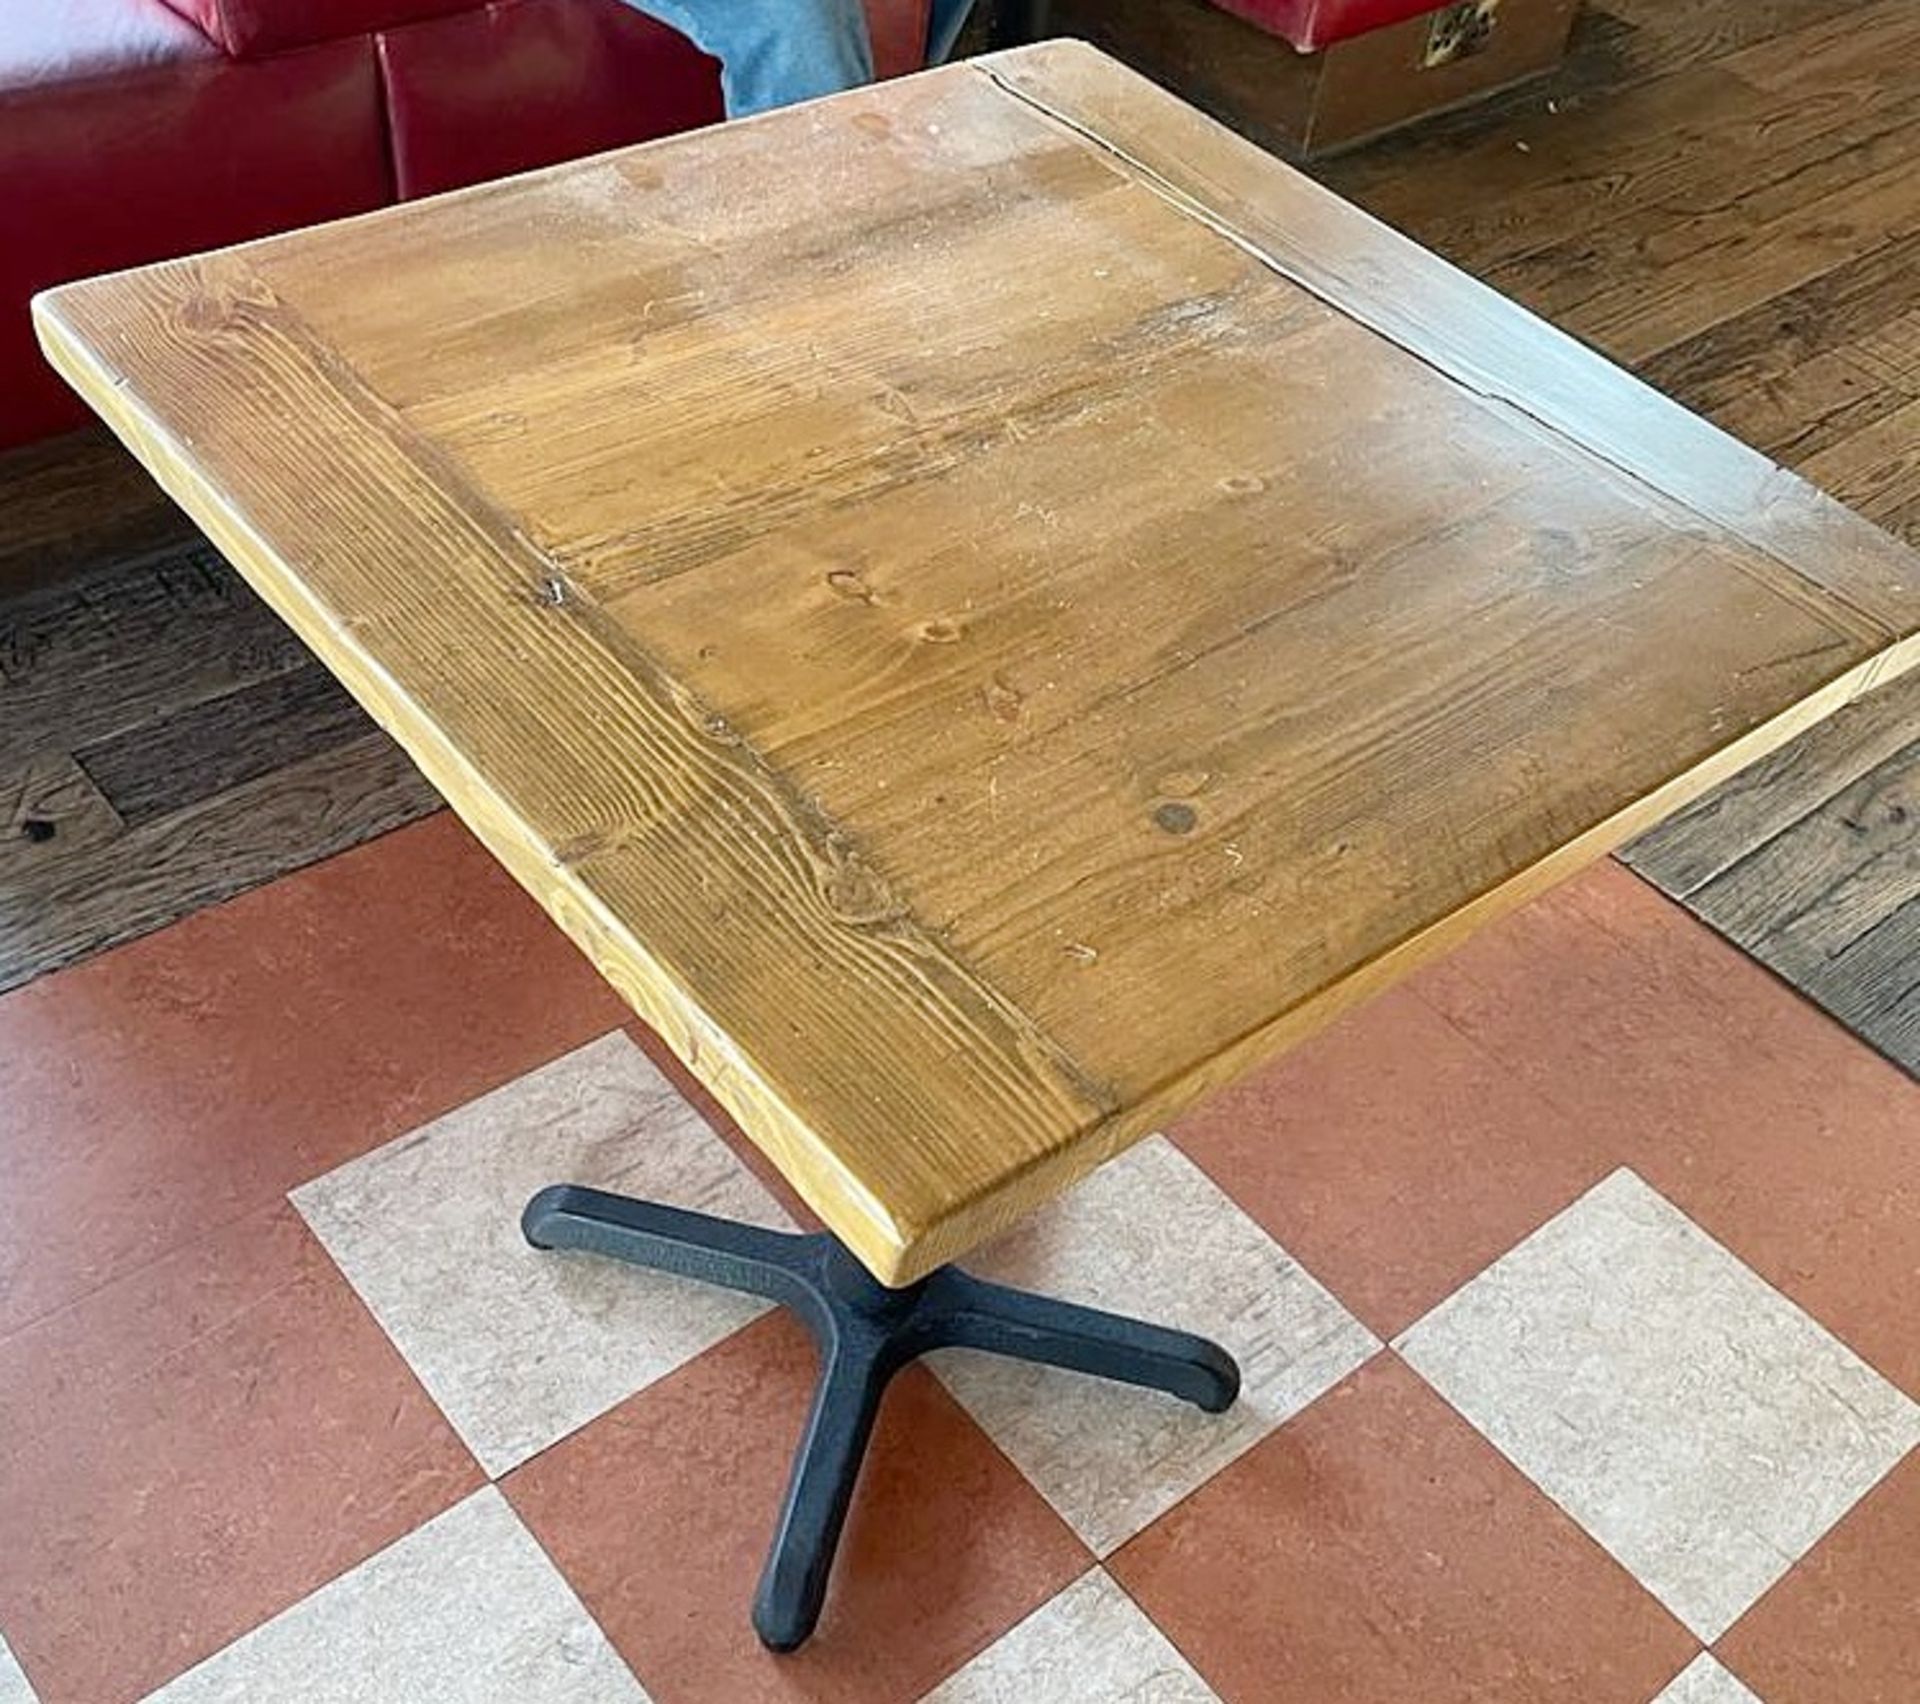 4 x Square Wood Topped Bistro Tables - Dimensions To Follow - Ref: FPSD102 - CL686